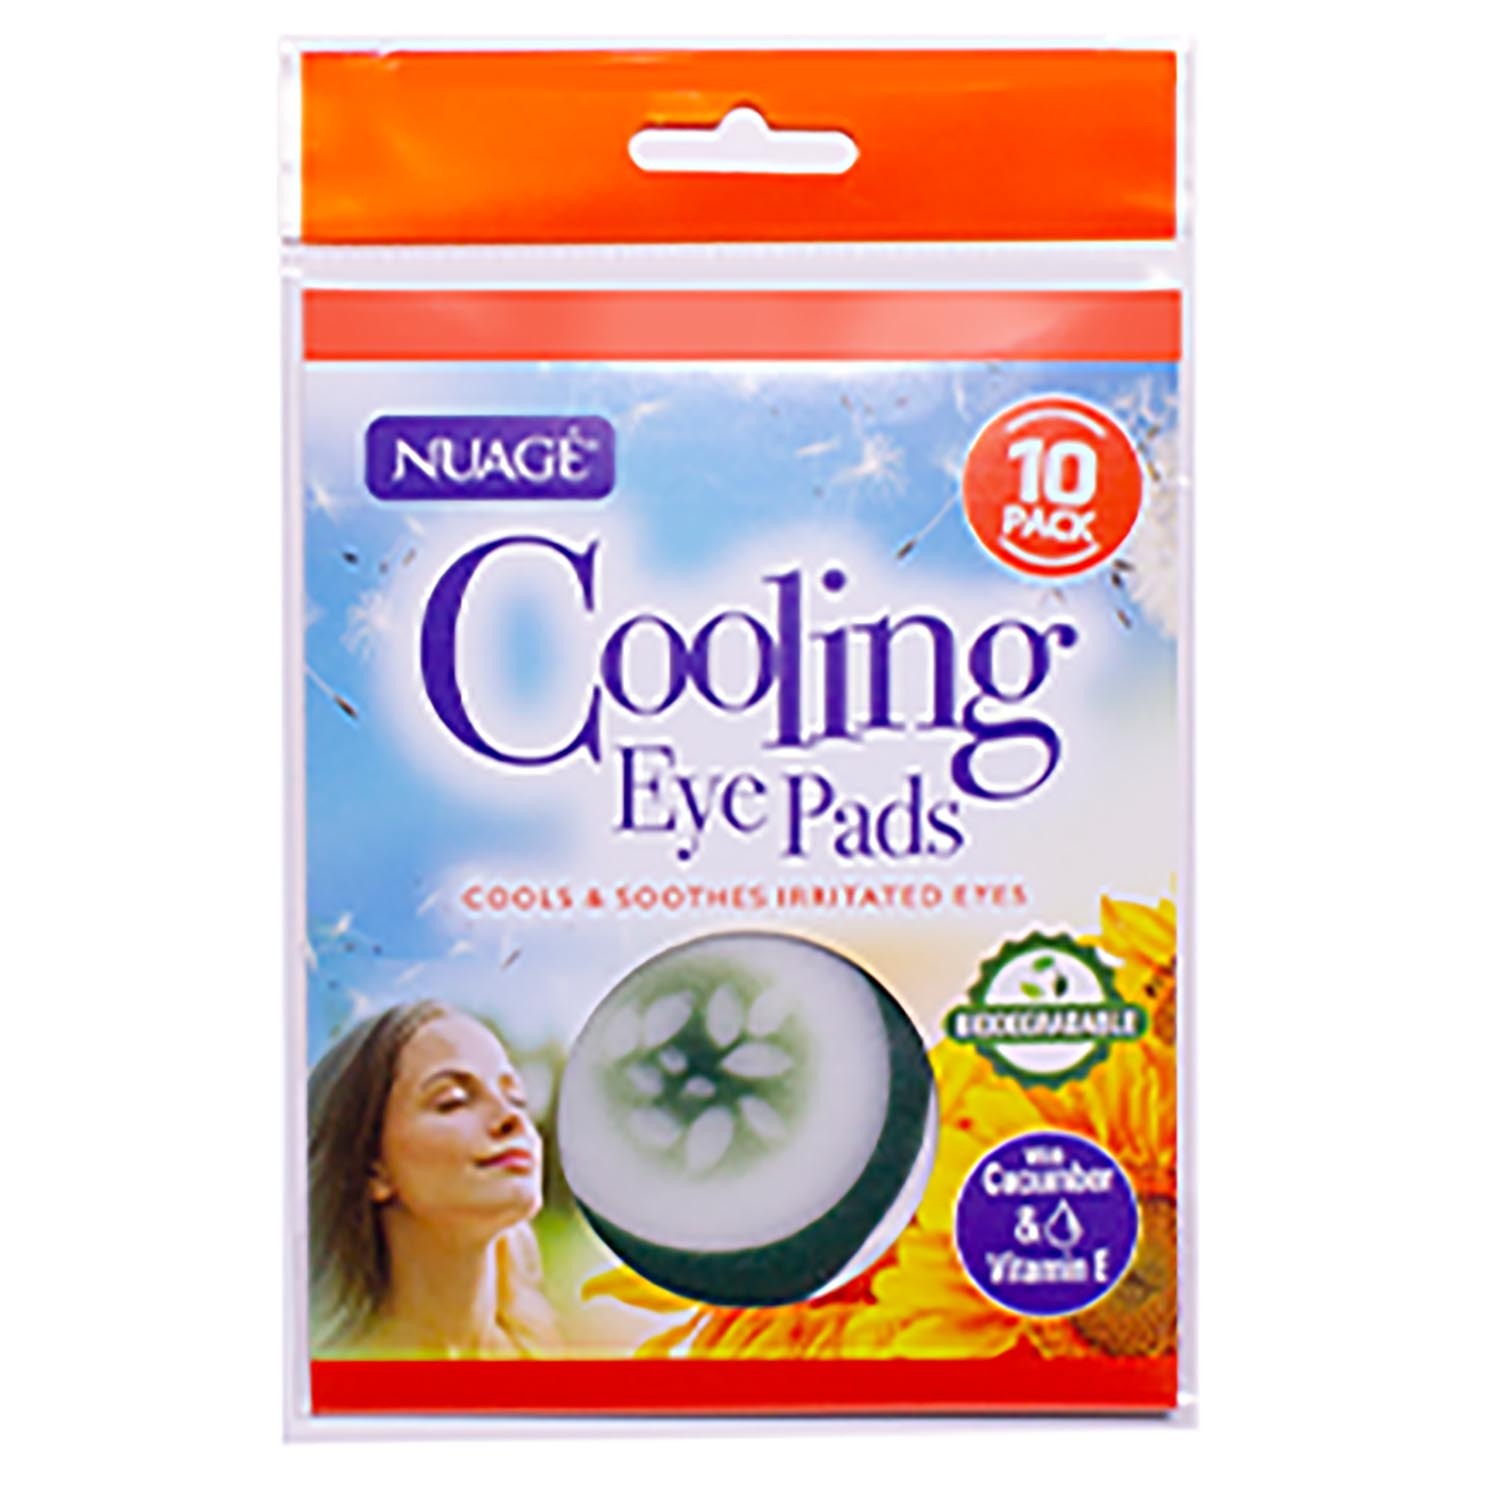 Nuage Cooling Eye Pads - Green Image